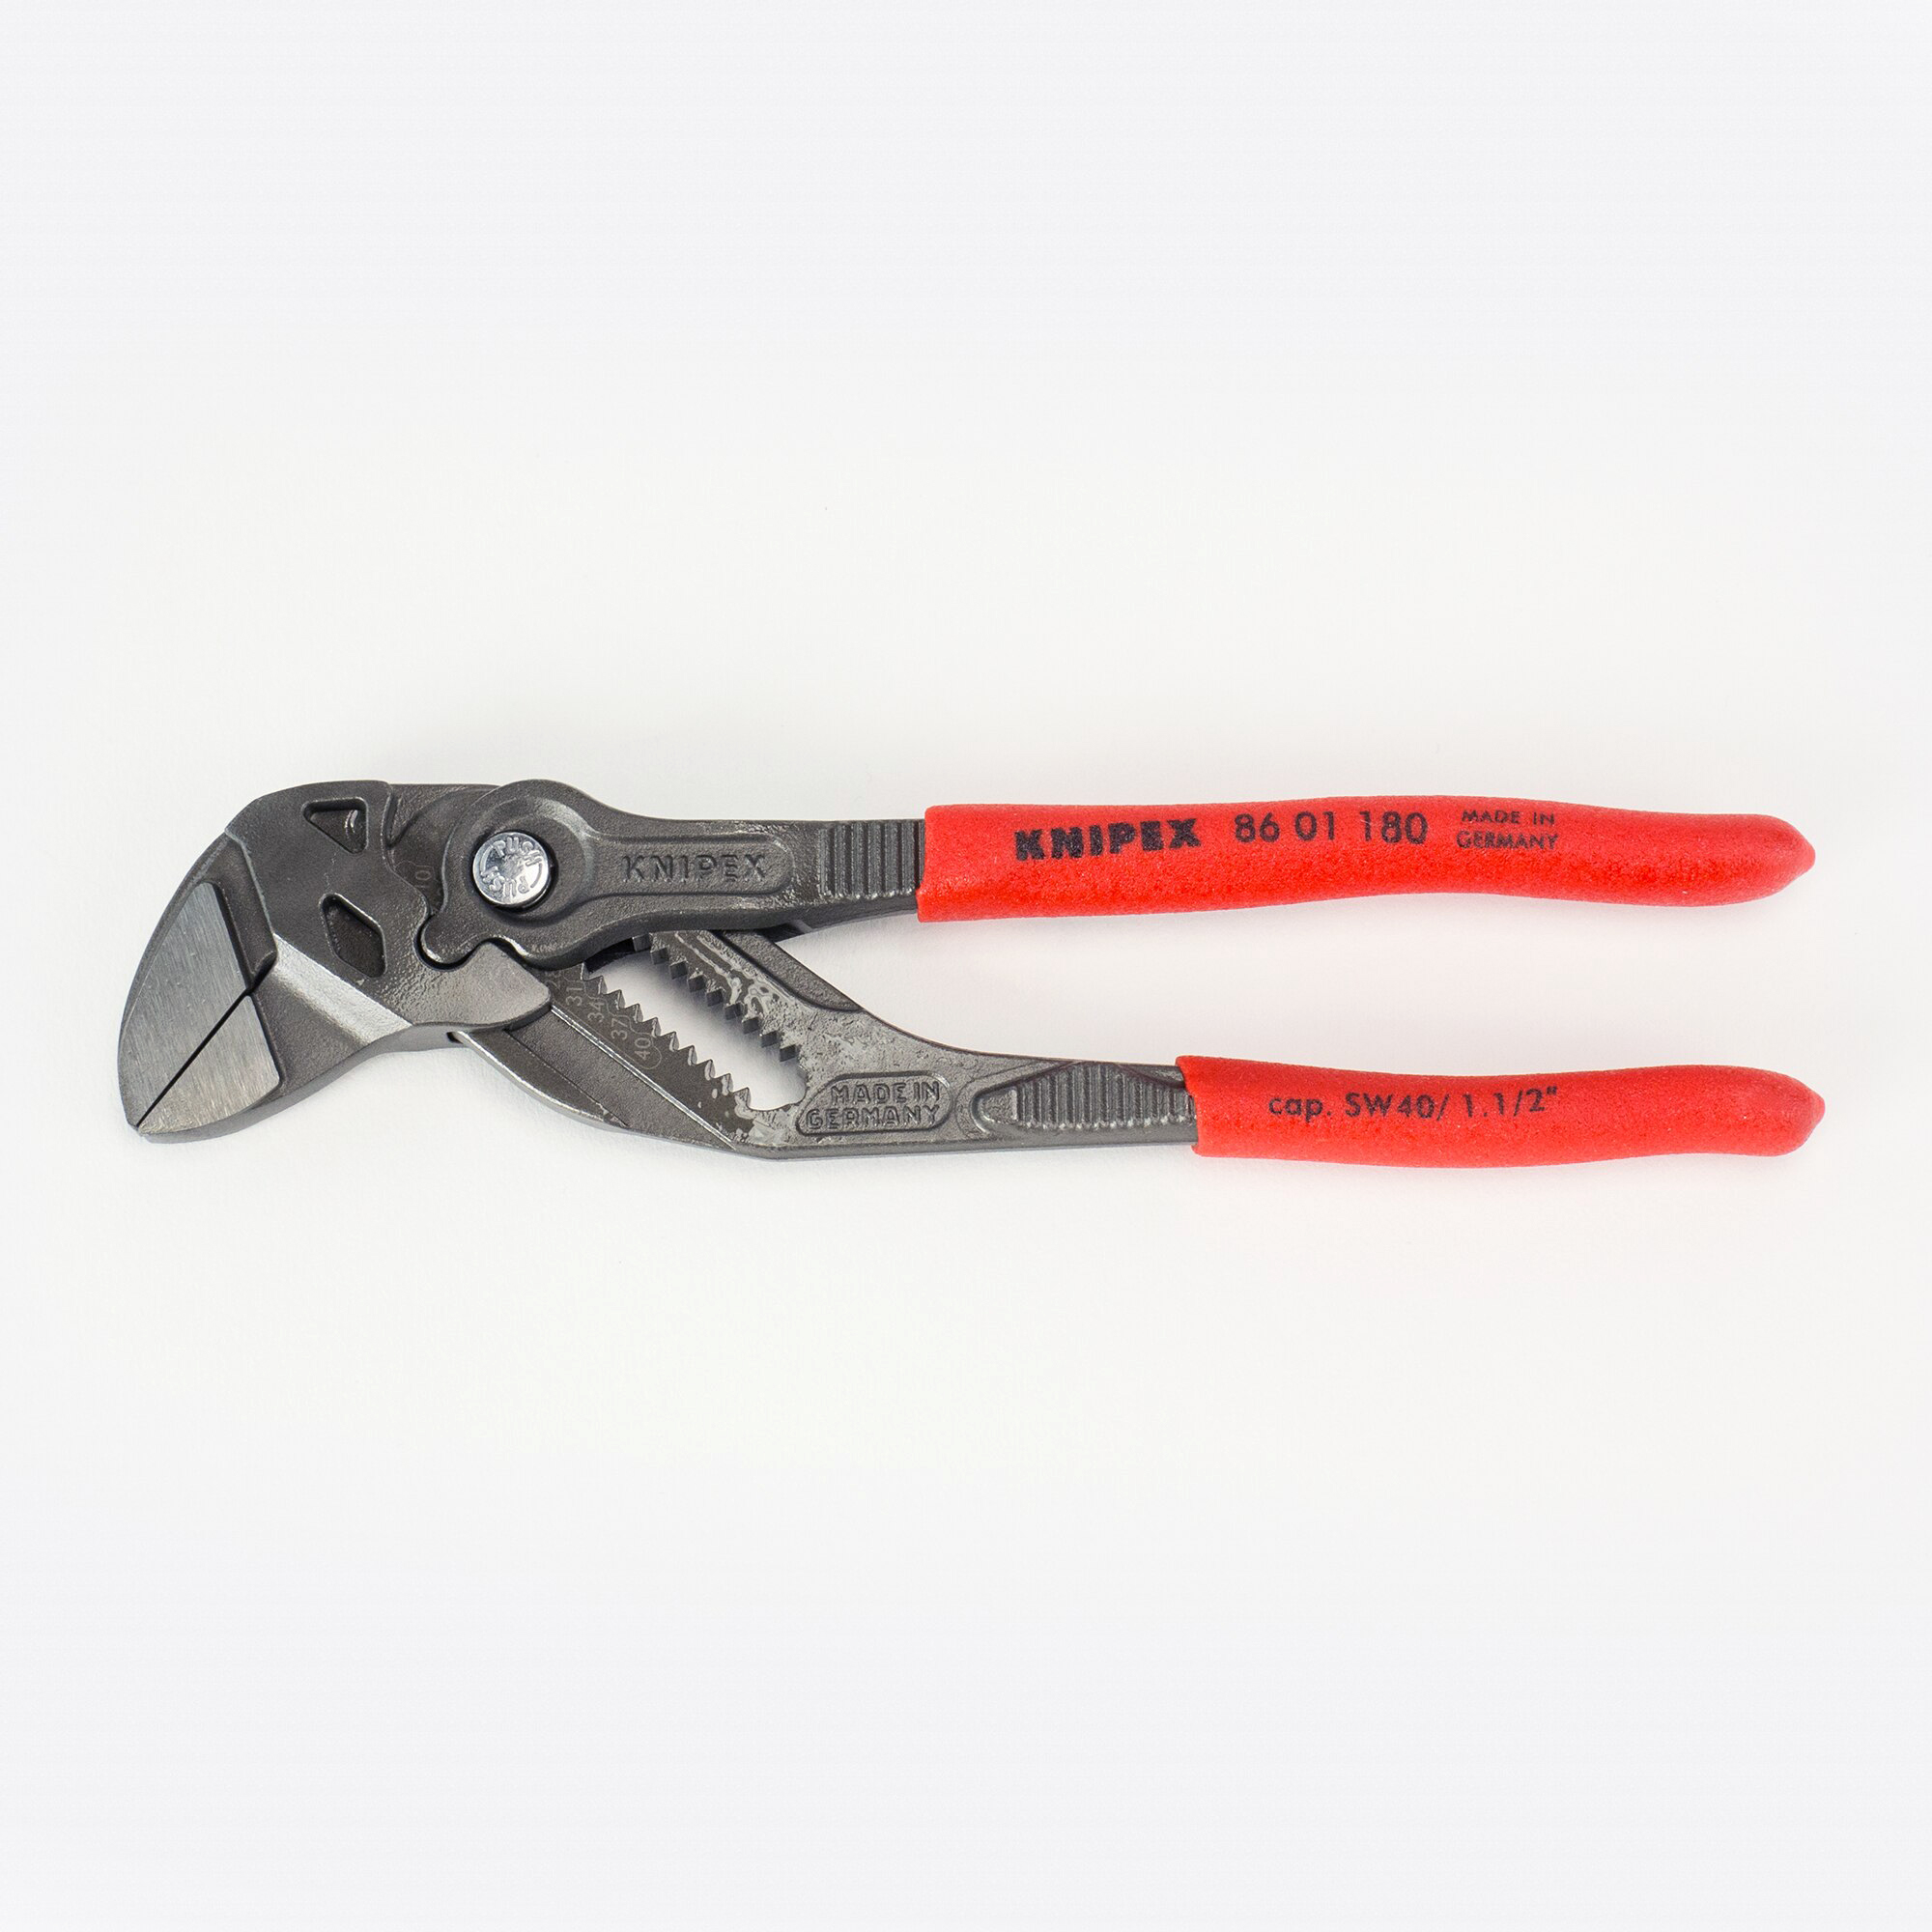 Knipex 86-01-180 7" Pliers Wrench - Plastic Grip - KC Tool